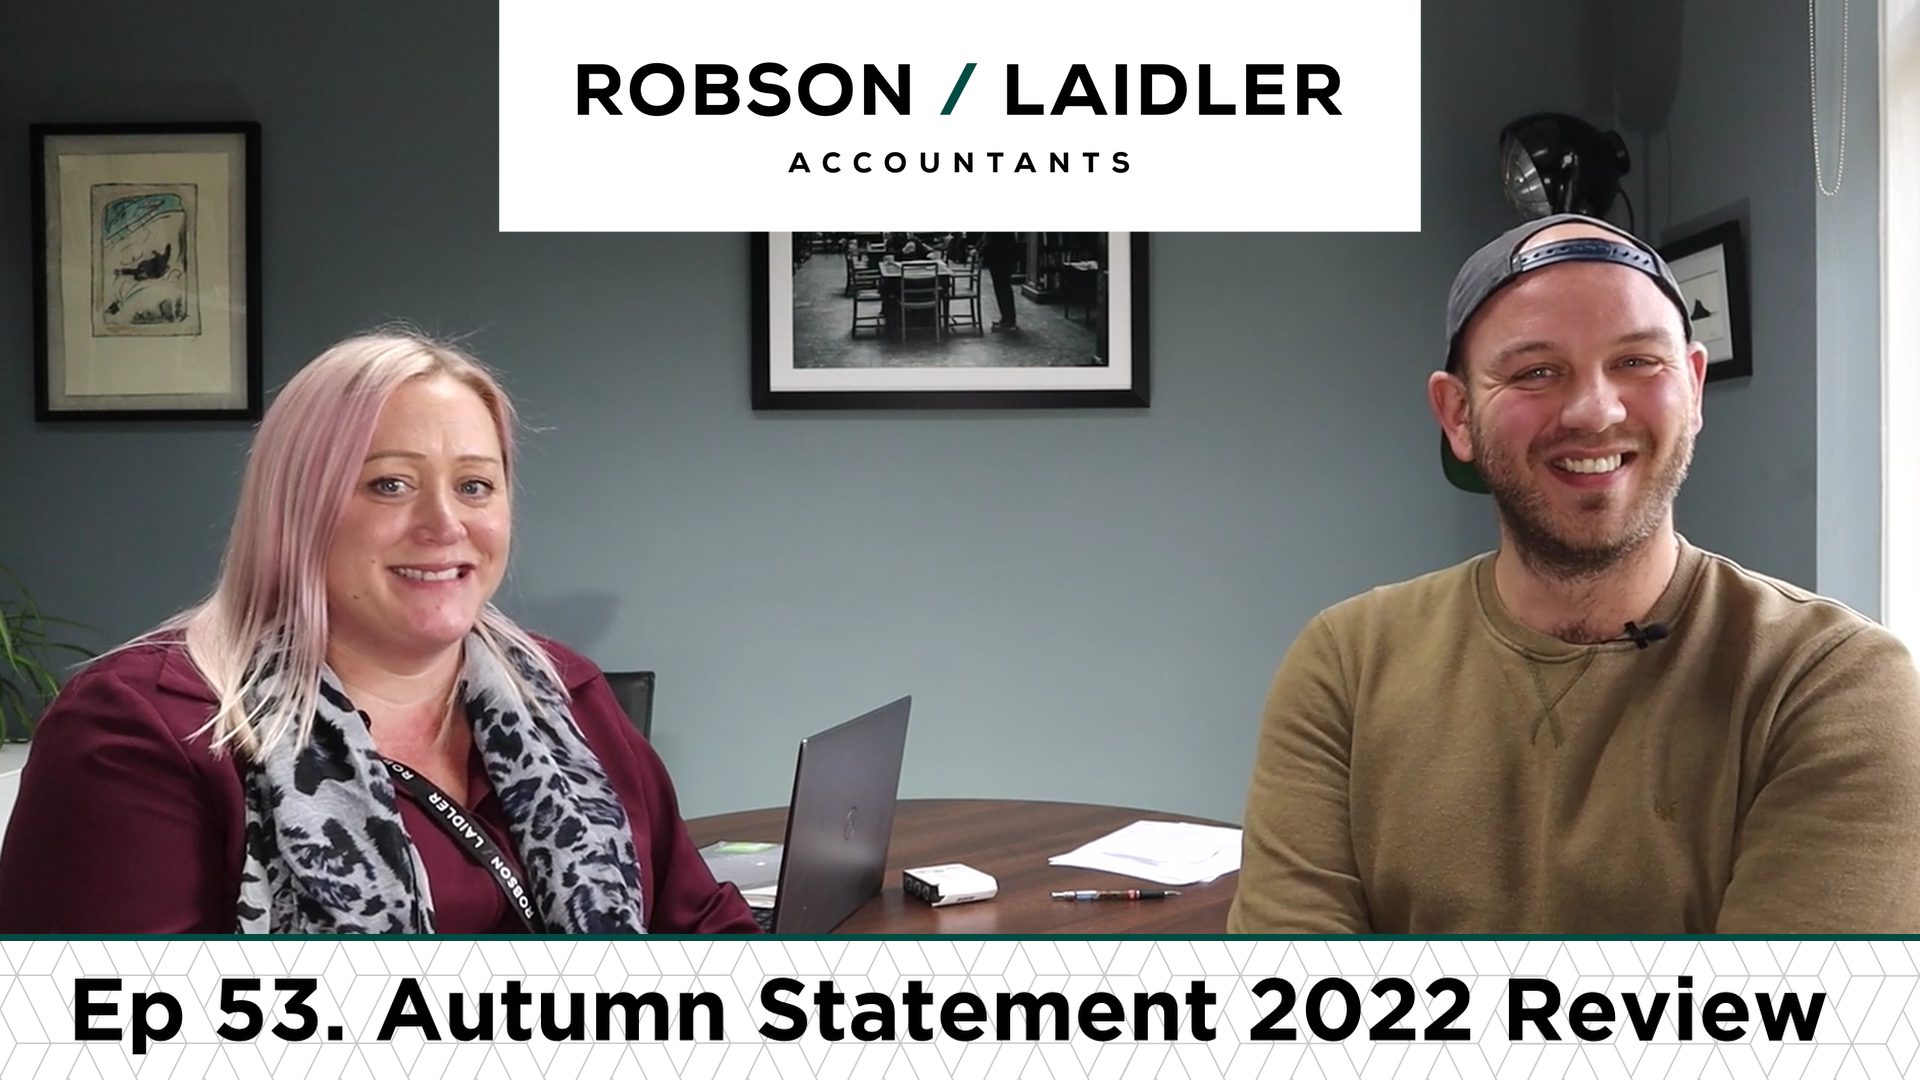 2022 Autumn Statement review podcast